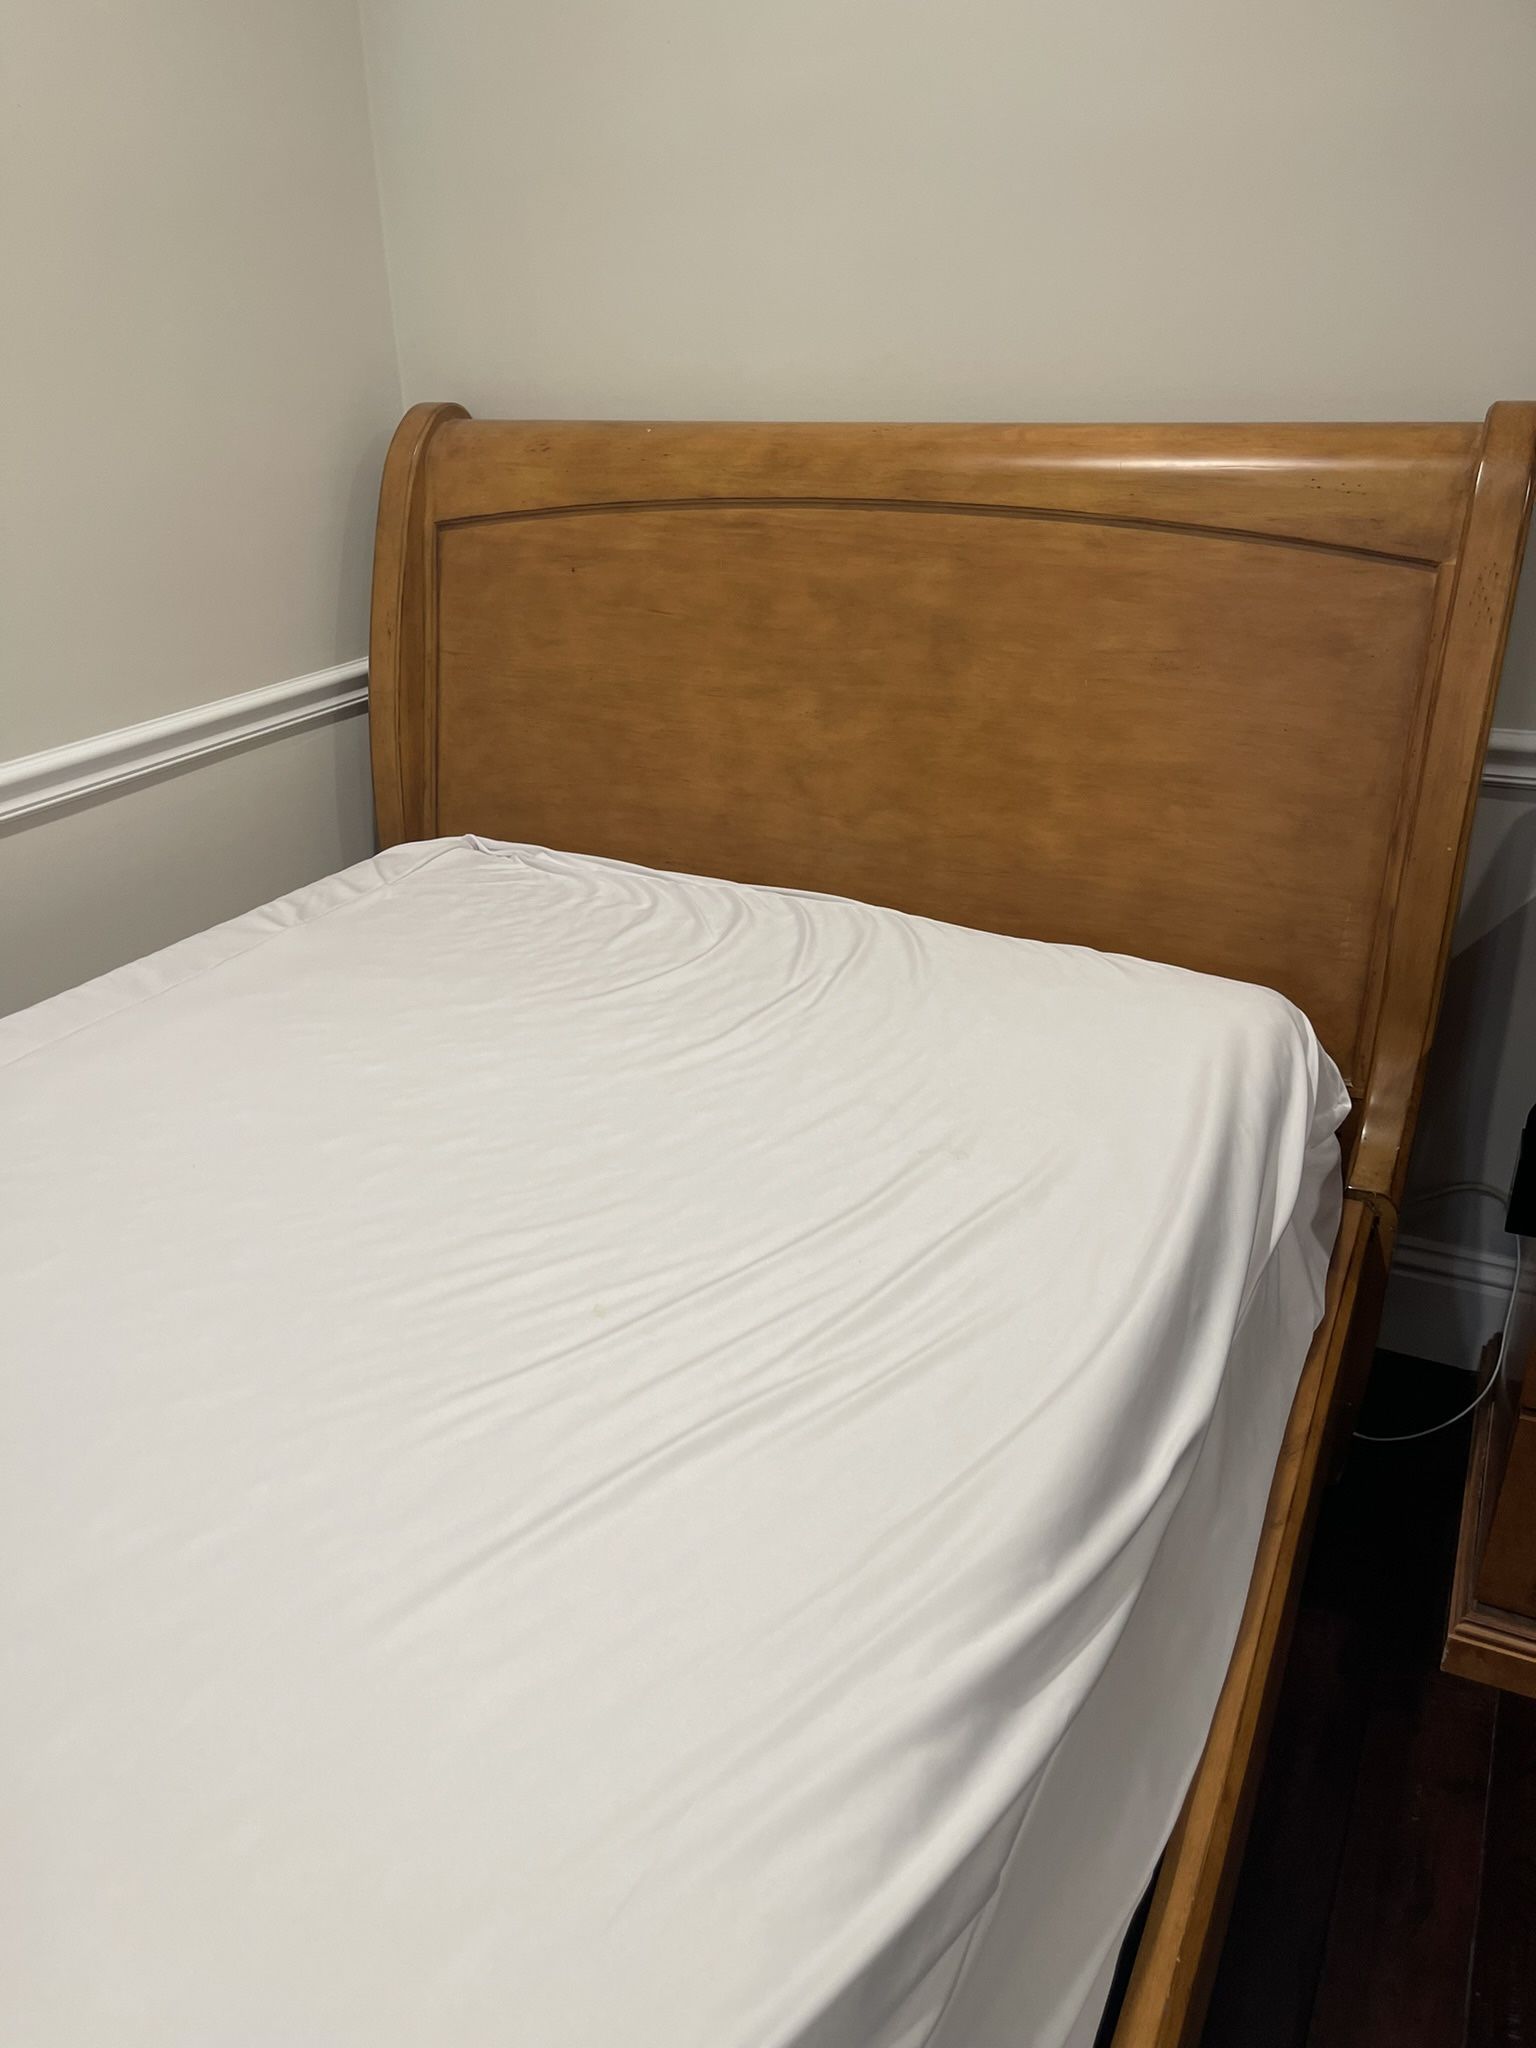 Full Size Bedroom - Mattress Excellent Condition - $199